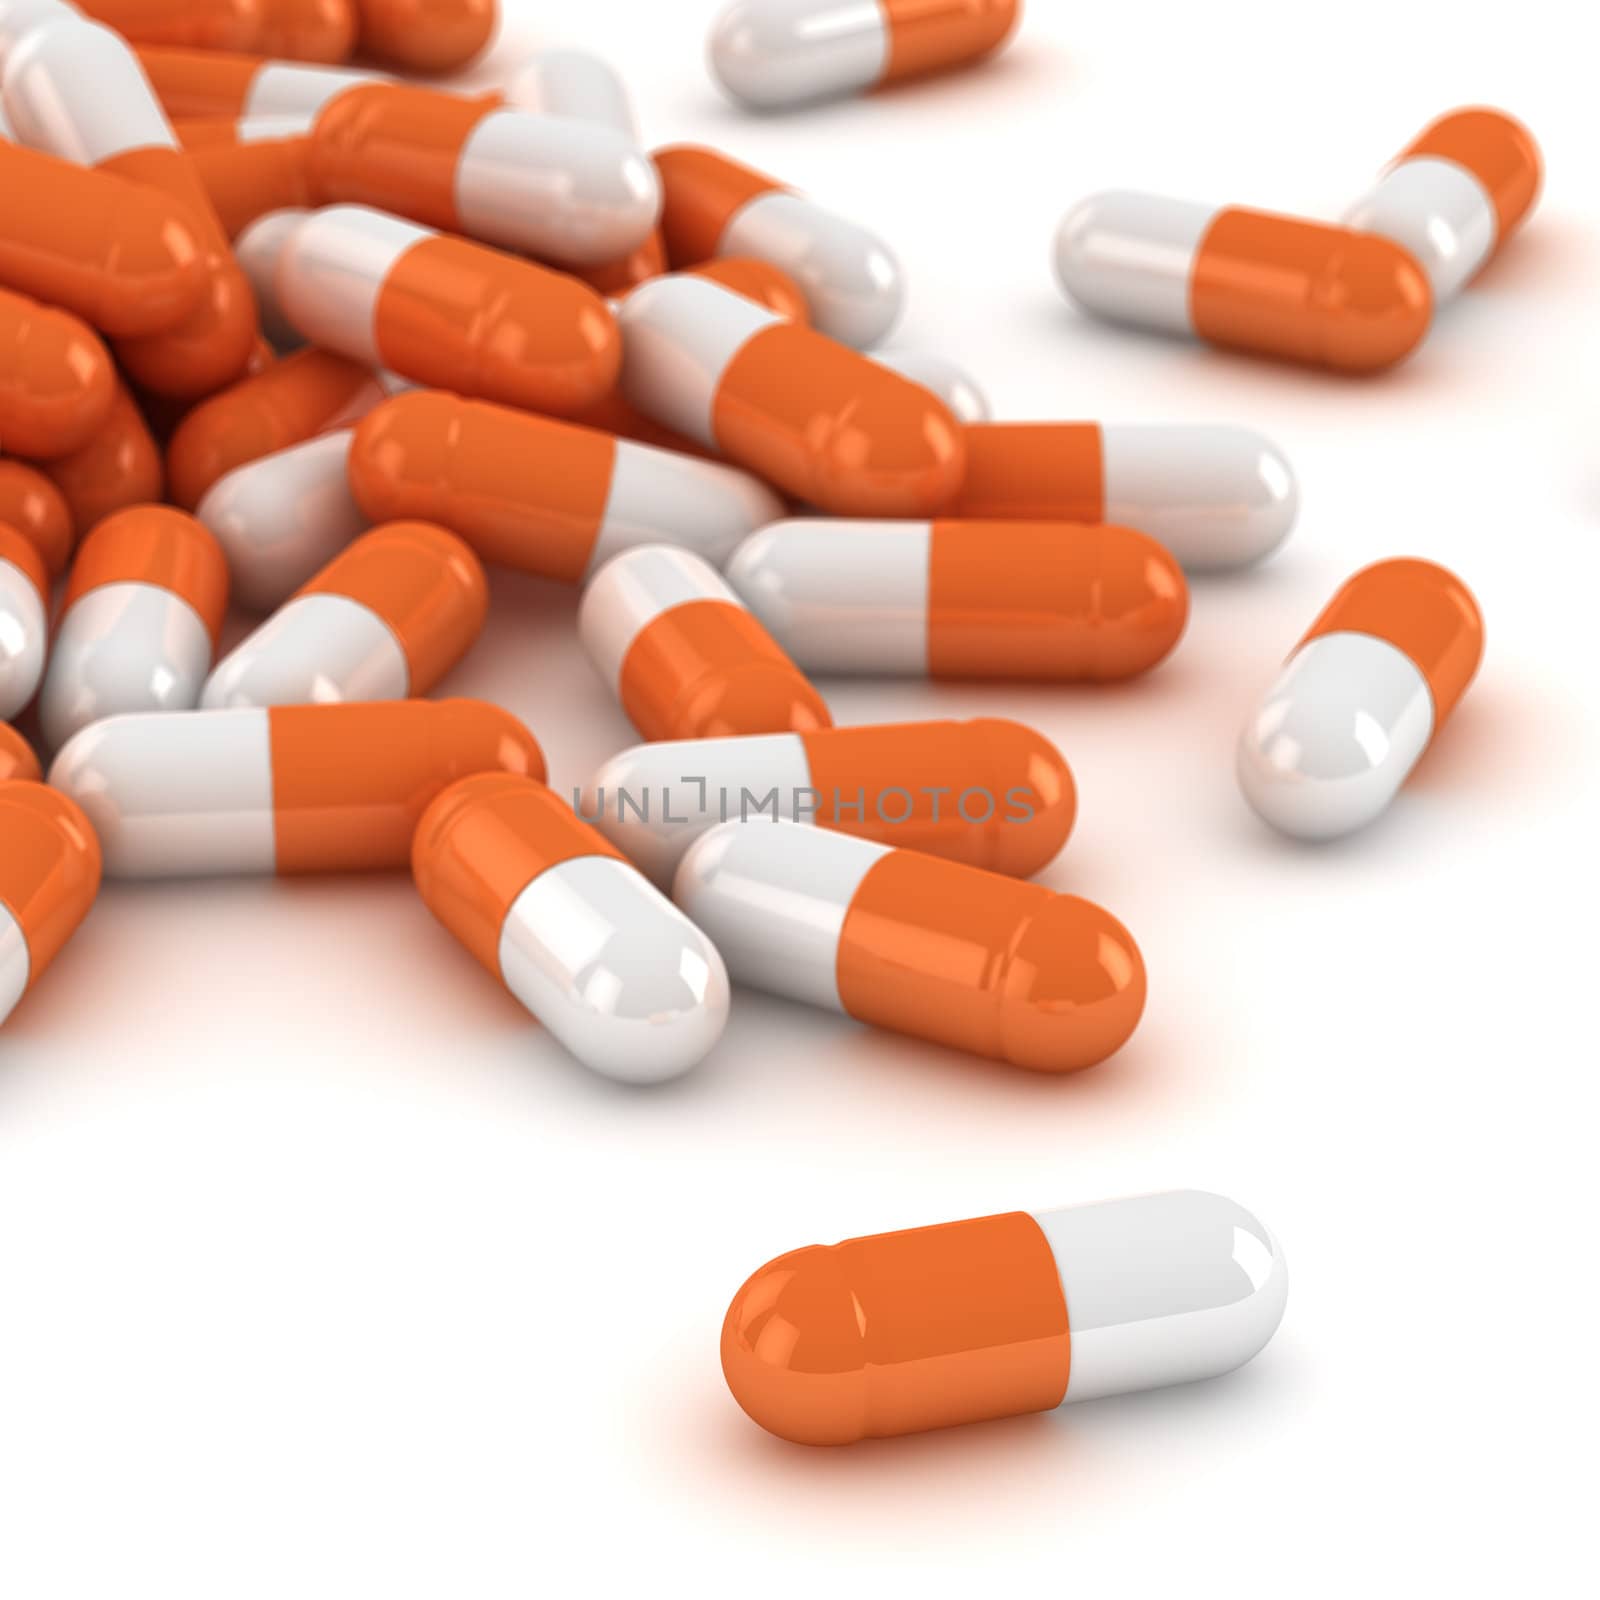 Heap of orange and white capsules, three-dimensional computer graphic.